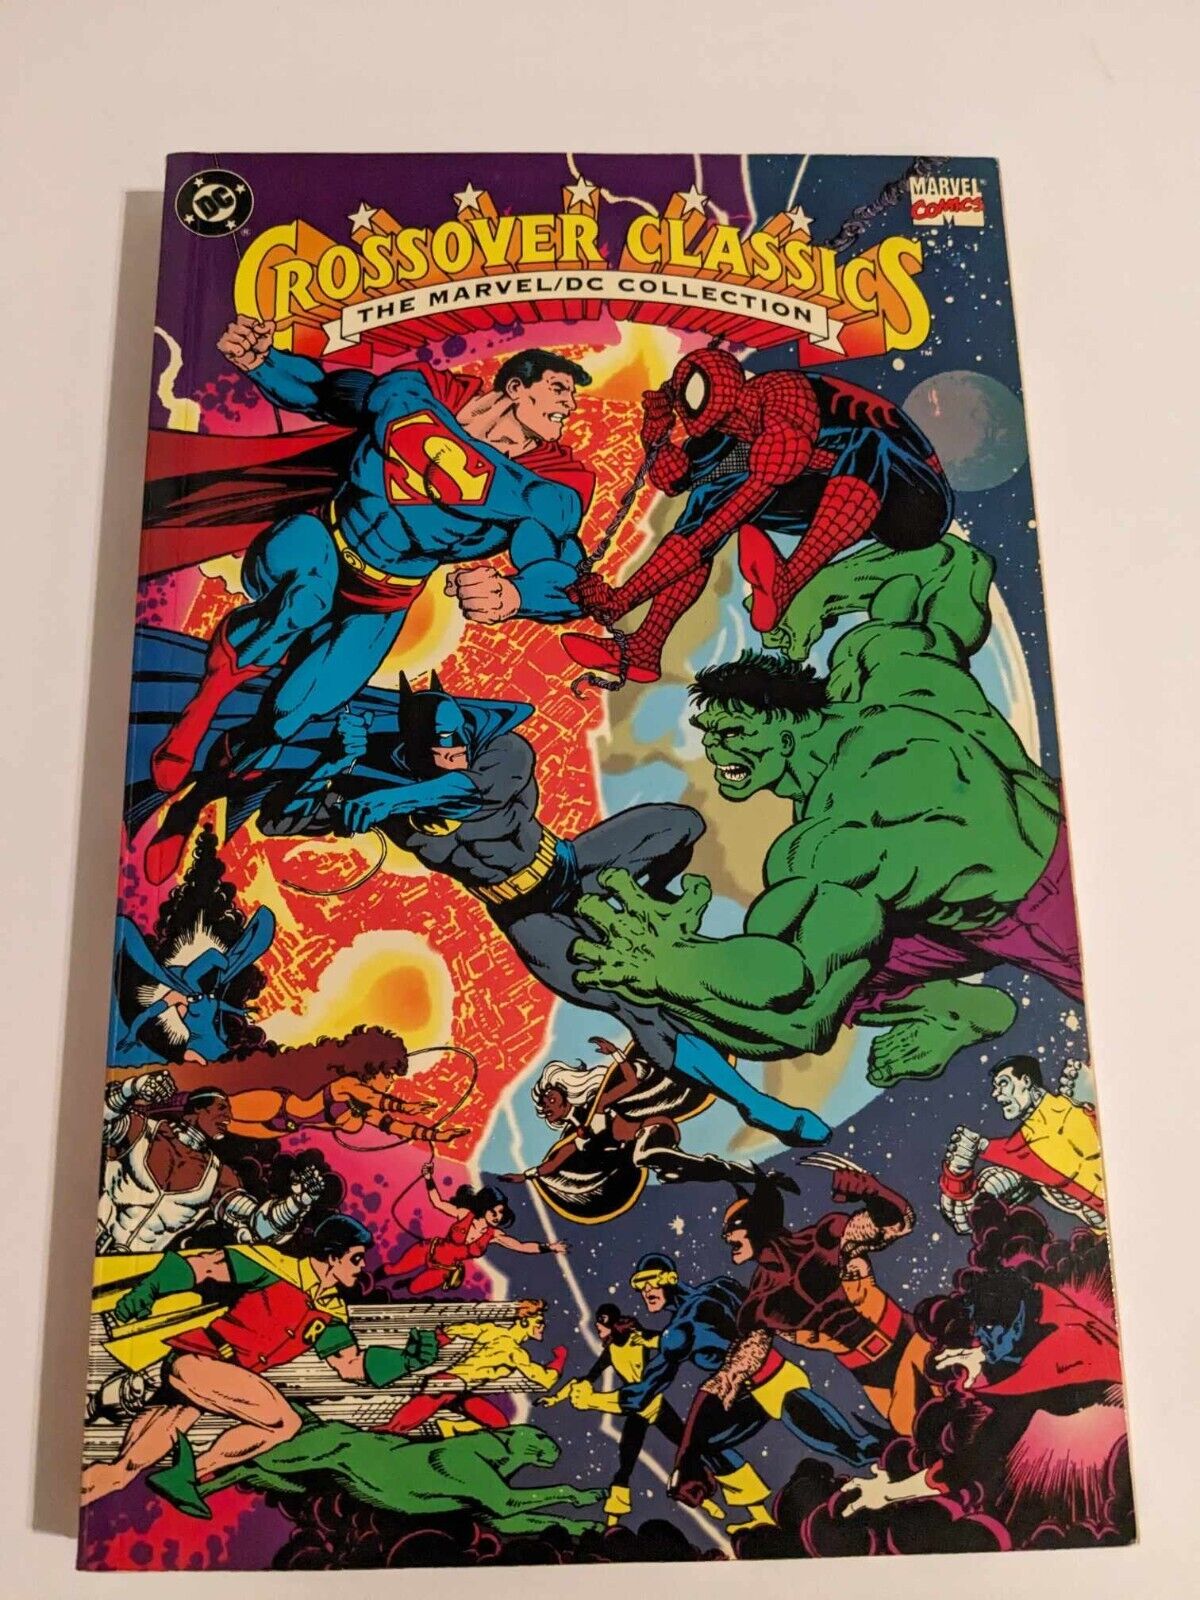 Crossover Classics - The Marvel / DC Collection.